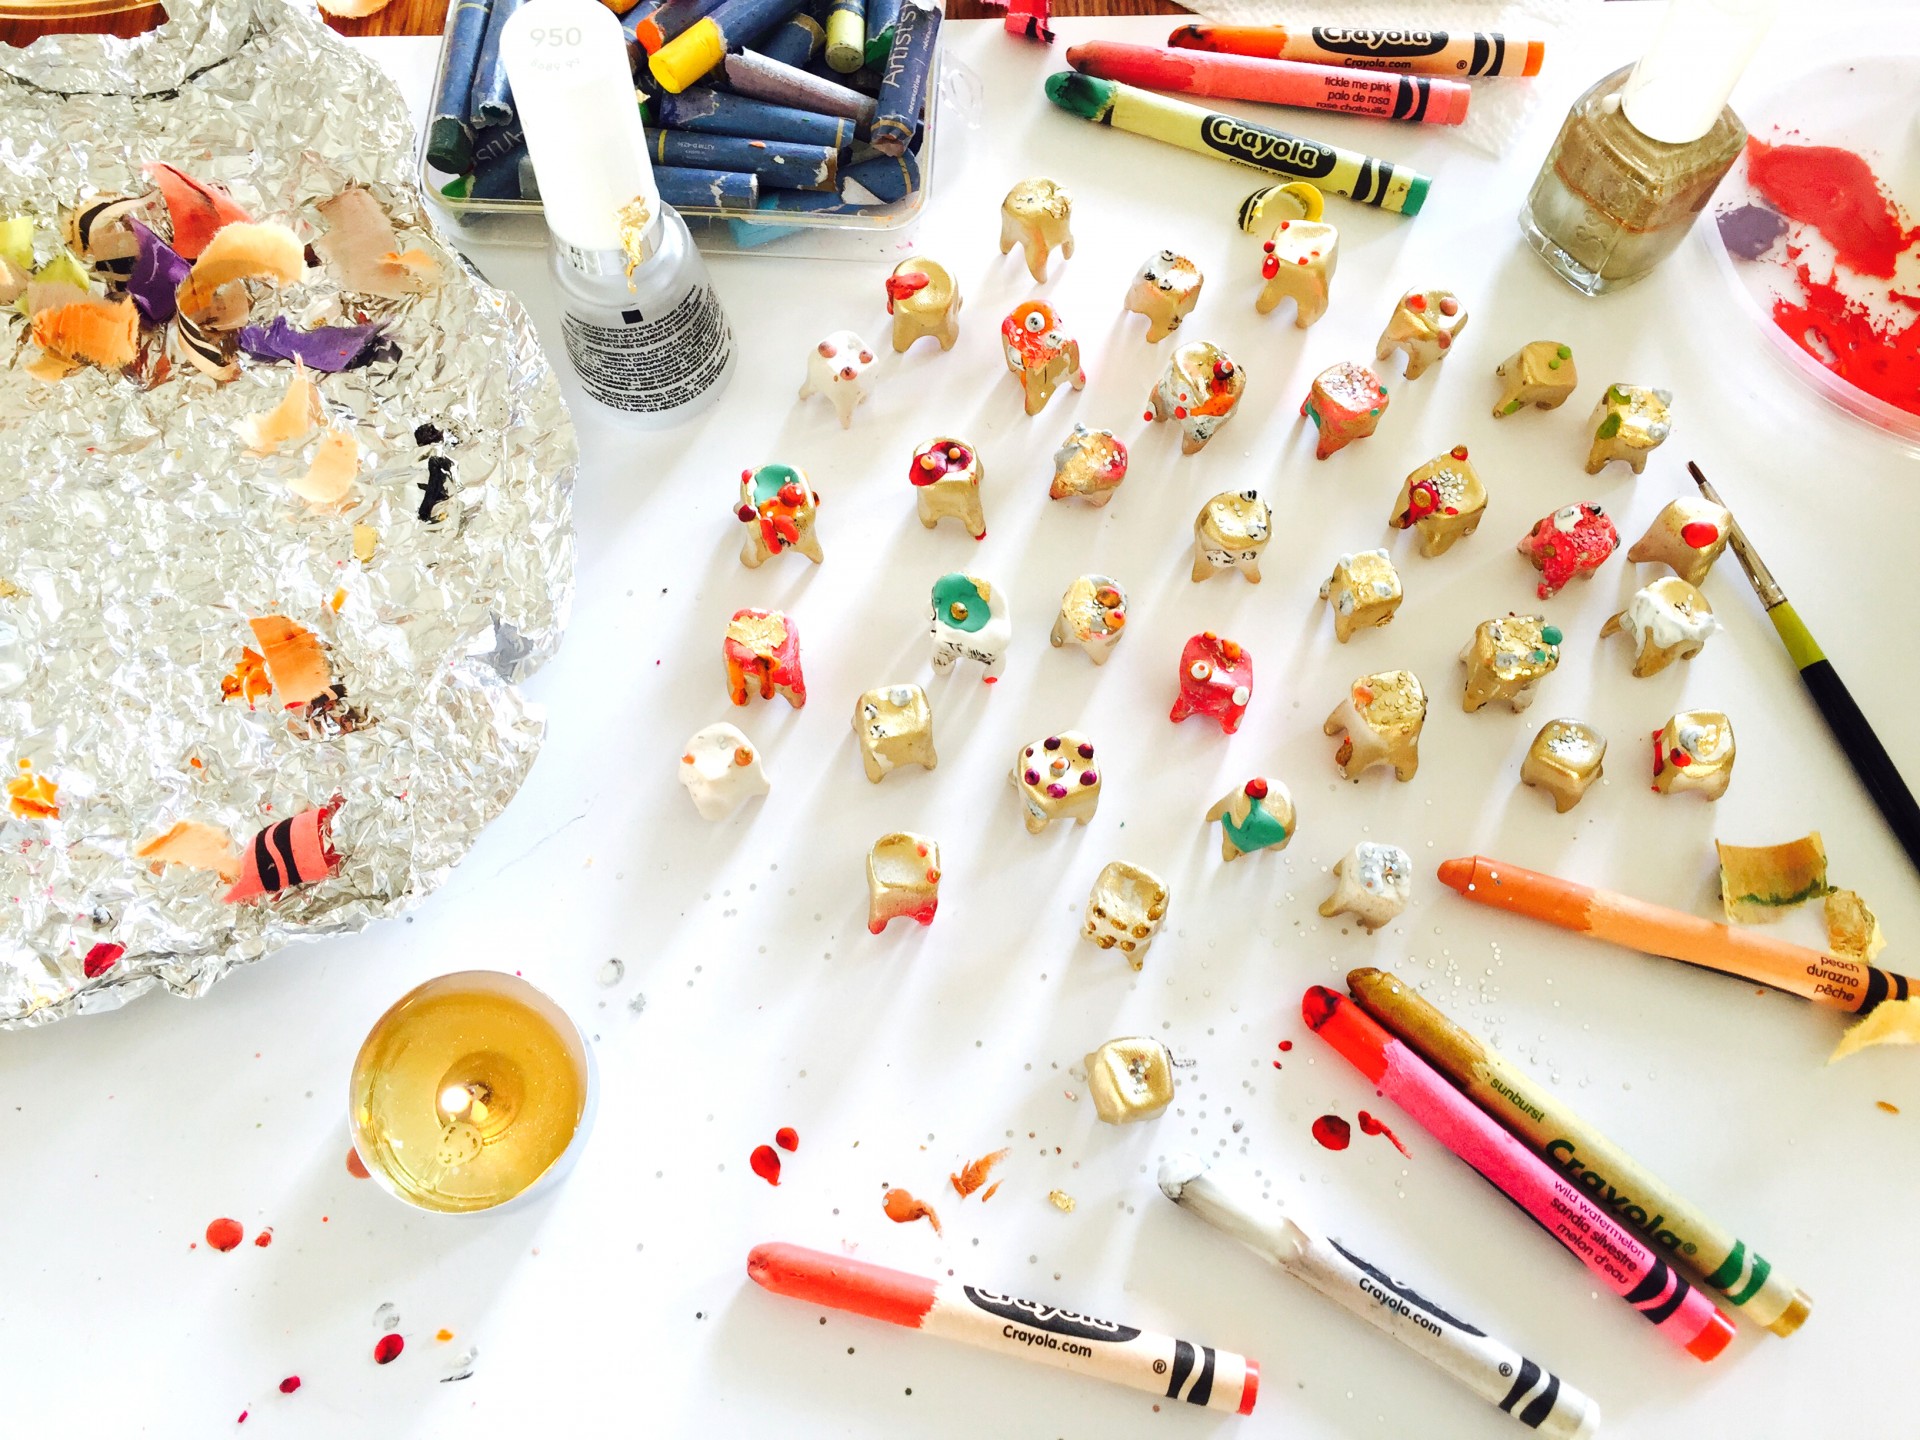 Workspace with crayons, candles and small teeth made out of clay.